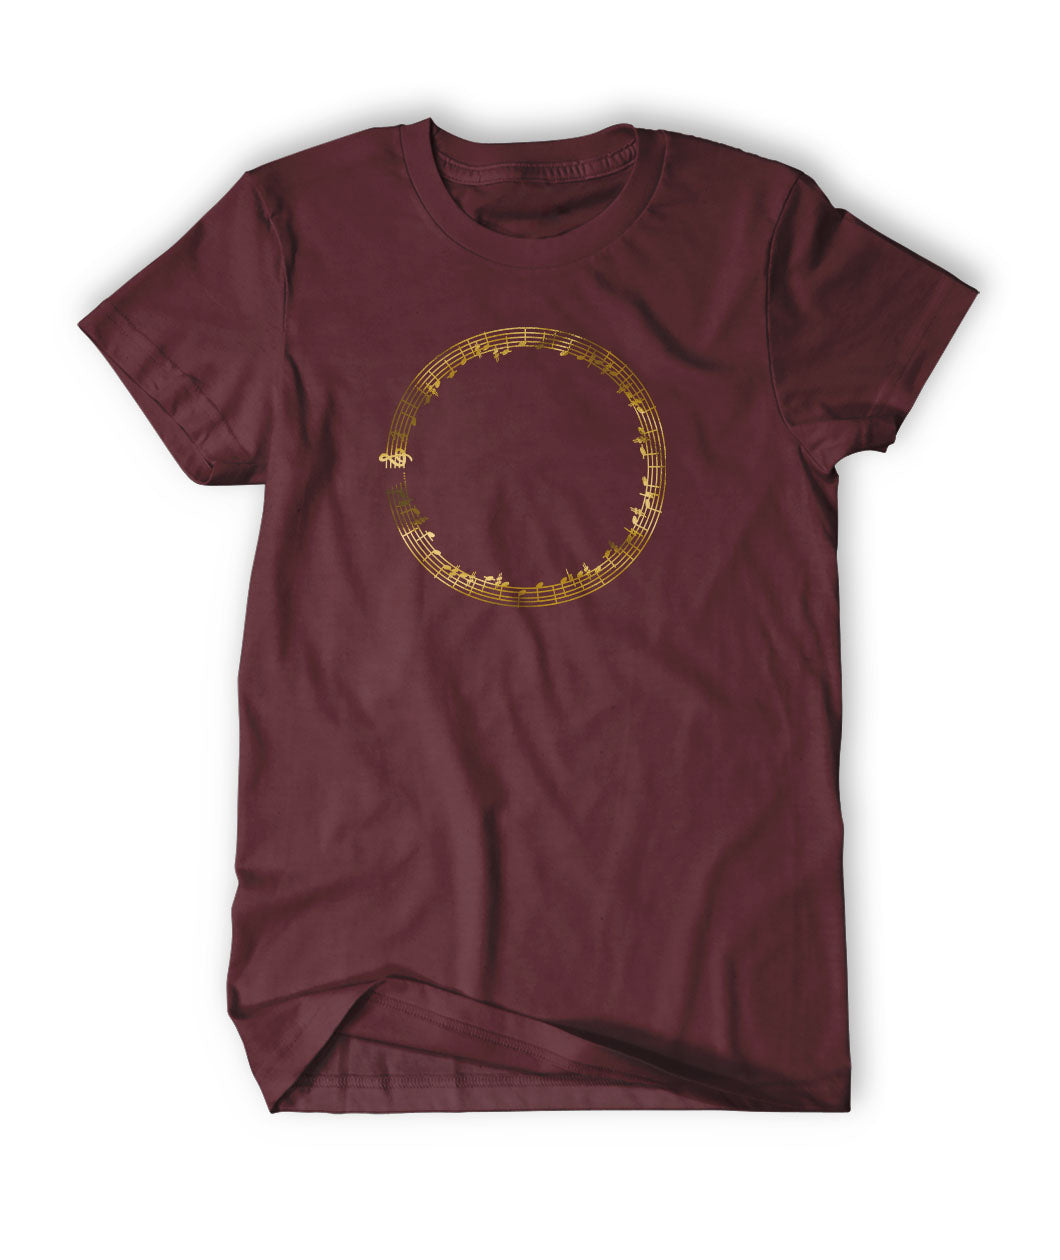 Maroon shirt with a circle of music notes and bars in metallic copper ink in the center of the shirt - from Vi Hart